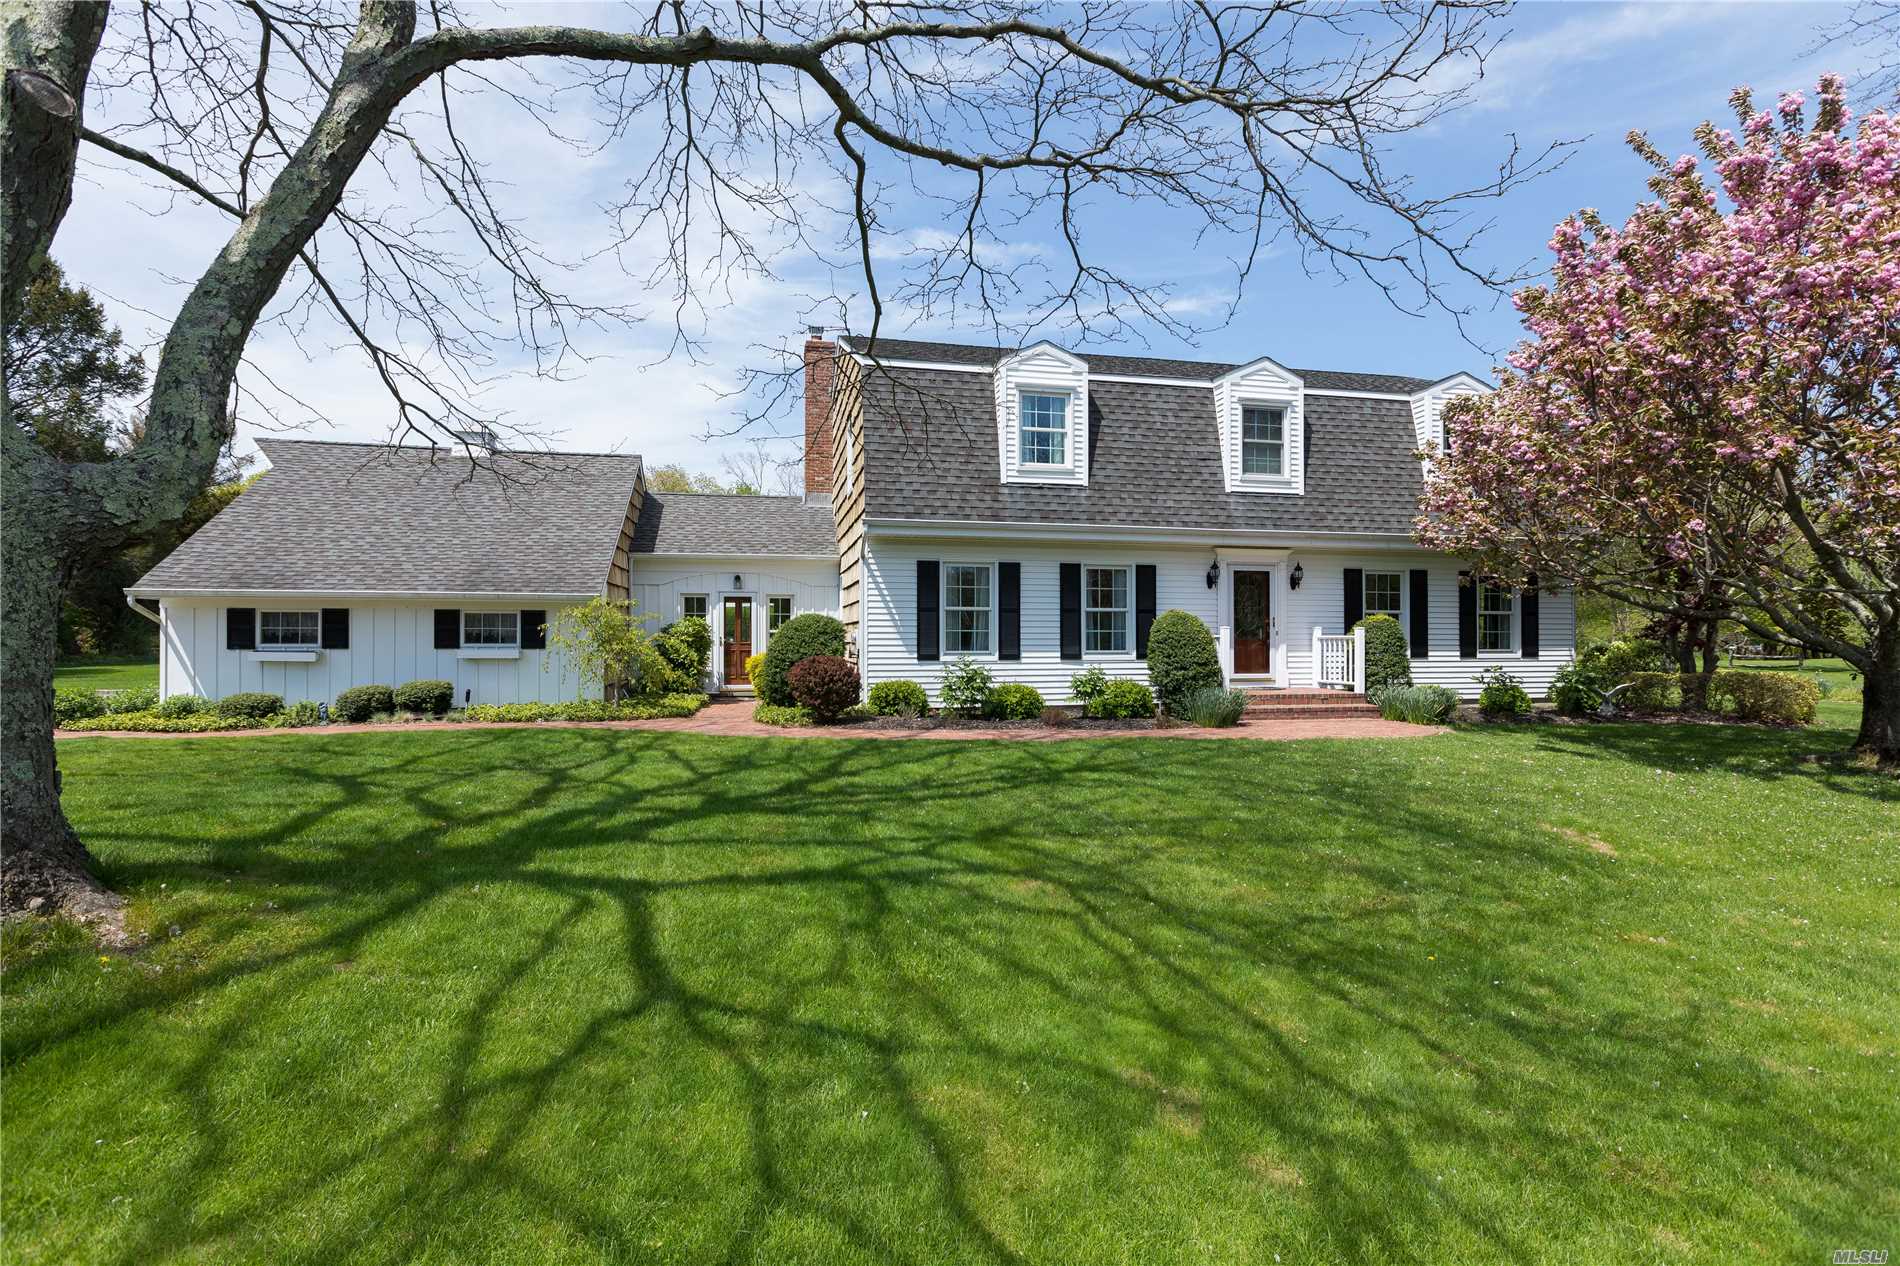 This is the best of the North Fork! Come home to this lovely Dutch Colonial located on a quiet cul-de-sac. Wonderful private garden w/ privets around your 20x40 ig heated swimming pool. This home welcomes you and your guests w/ 4 brs, 3 full baths, formal DR, LR, EIK, family room w/ fp, sunroom, and finished basement! Wood floors throughout, new windows, heater, furnace, new cac, and more! Founders landing district w/ potential for boat dock depending on lottery system, not guaranteed.